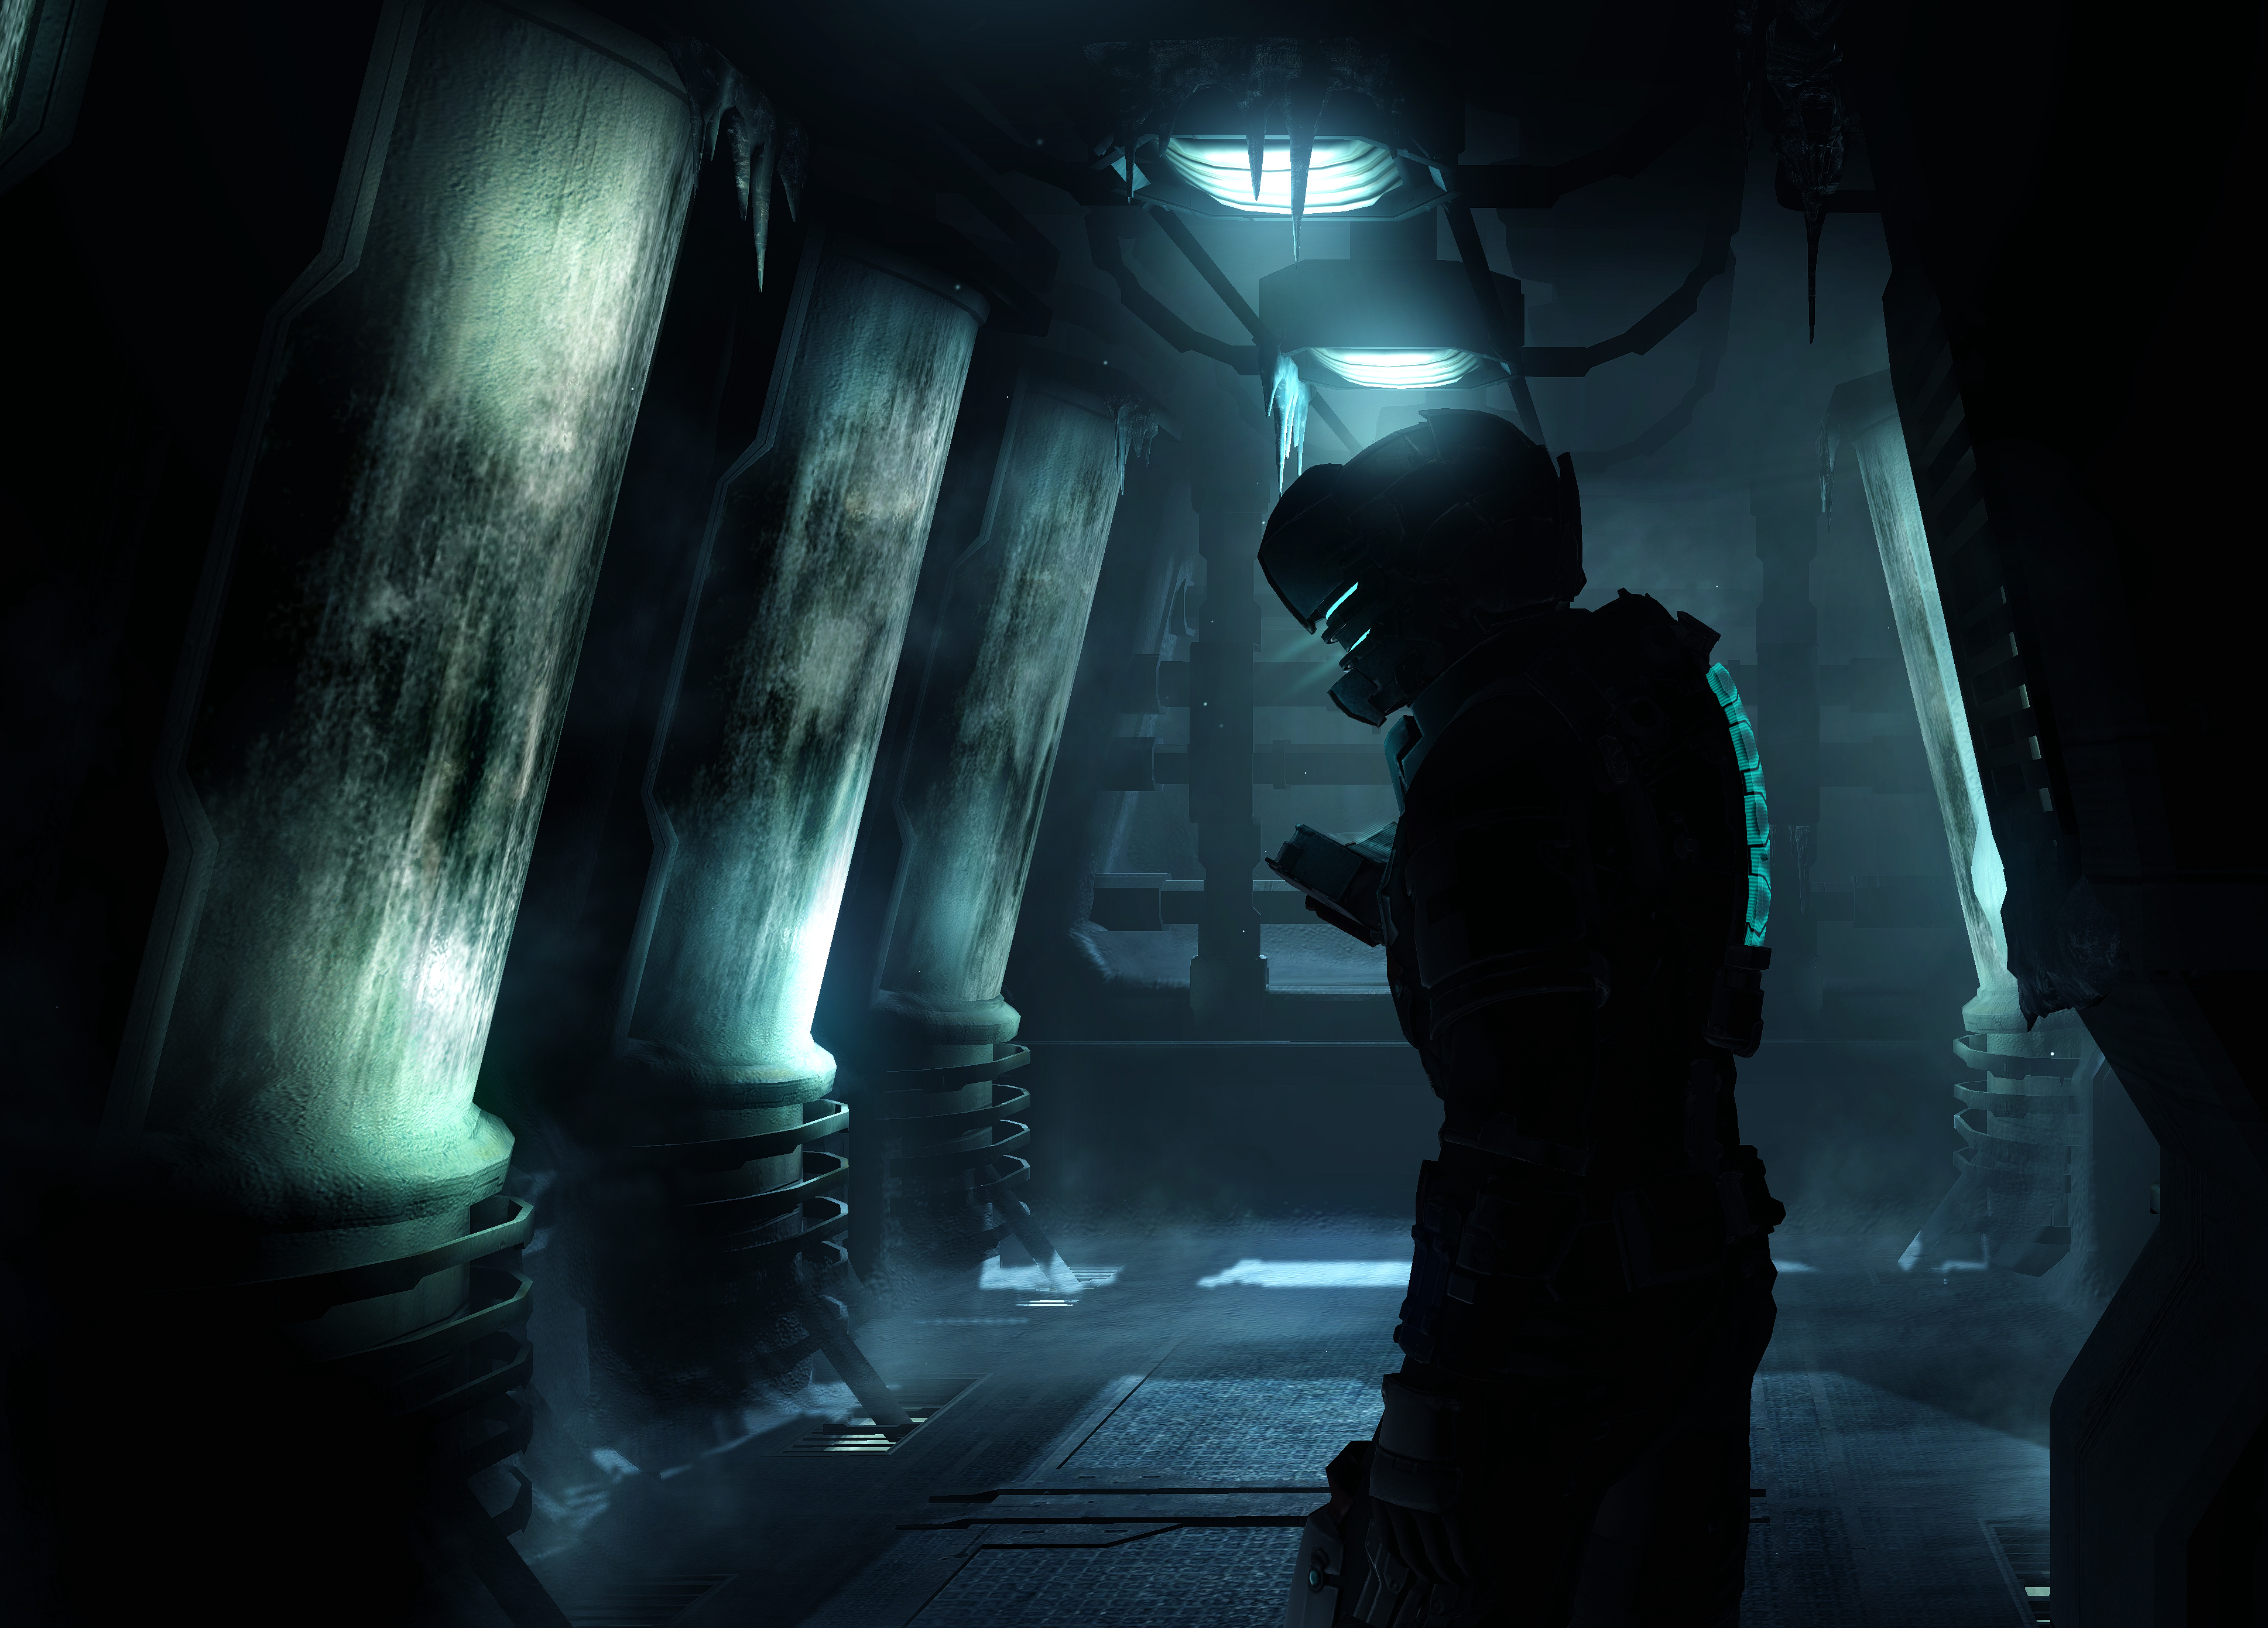 dead space 2 aftermath hall scene